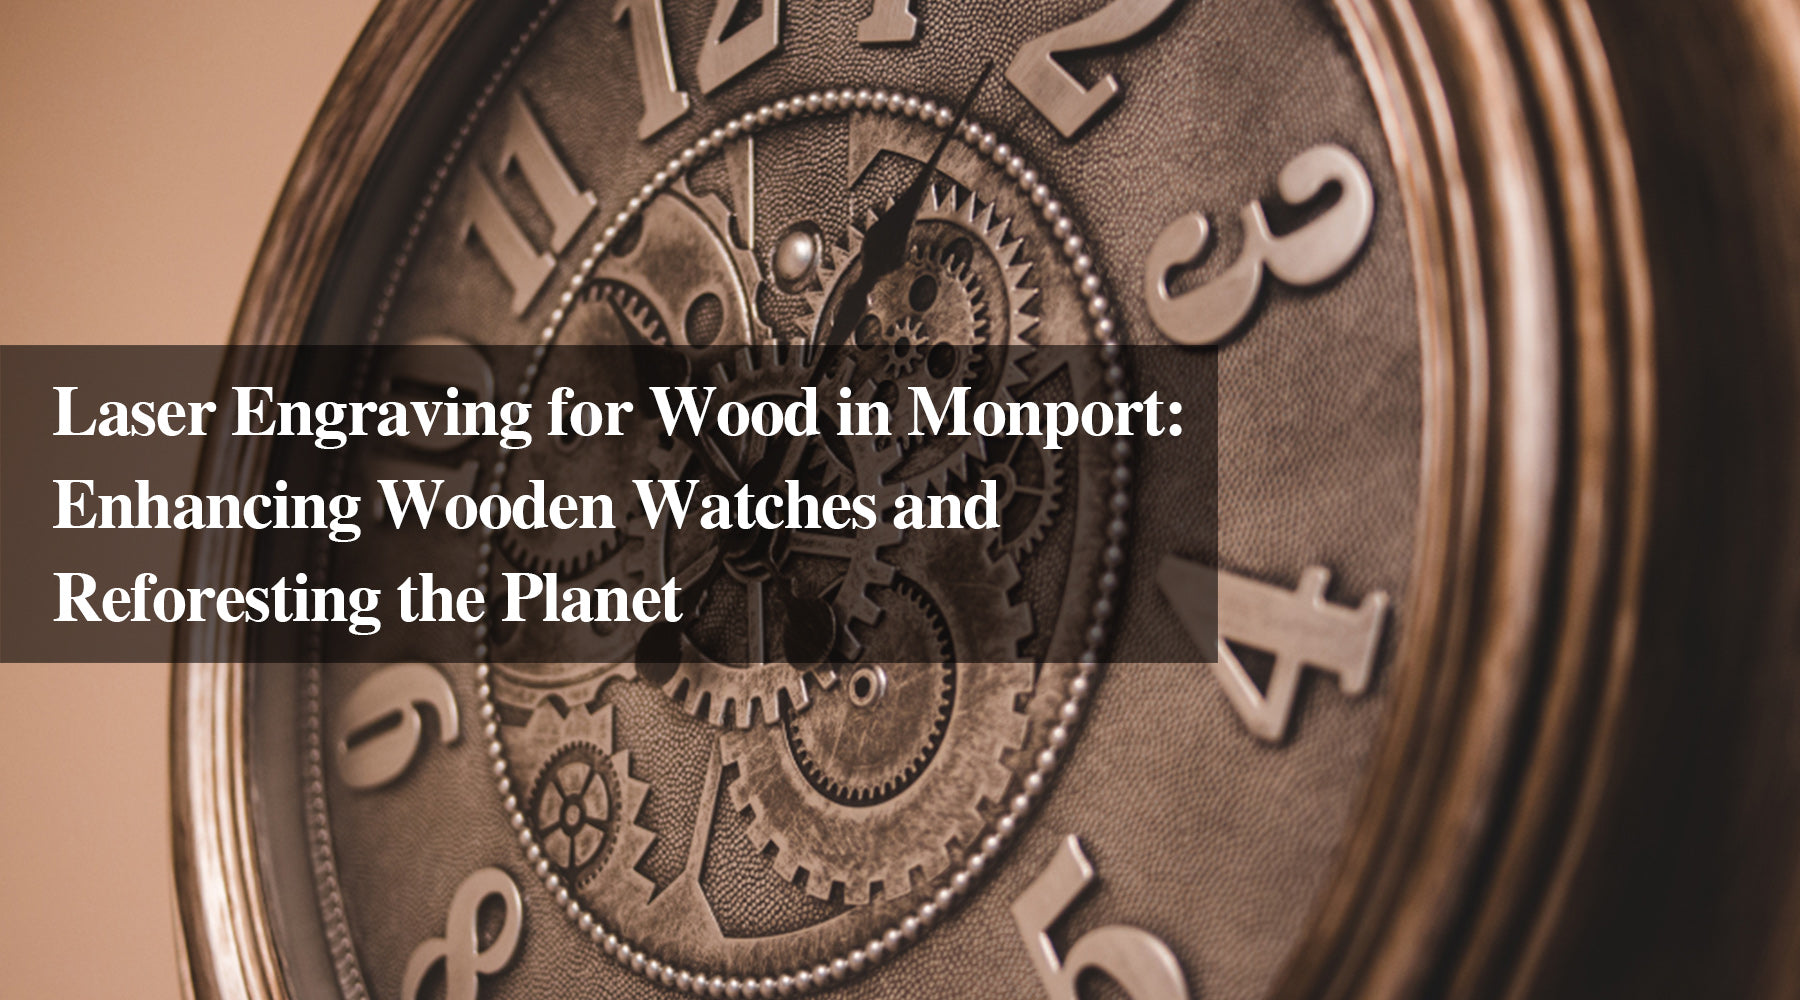 Laser Engraving for Wood in Monport: Enhancing Wooden Watches and Reforesting the Planet